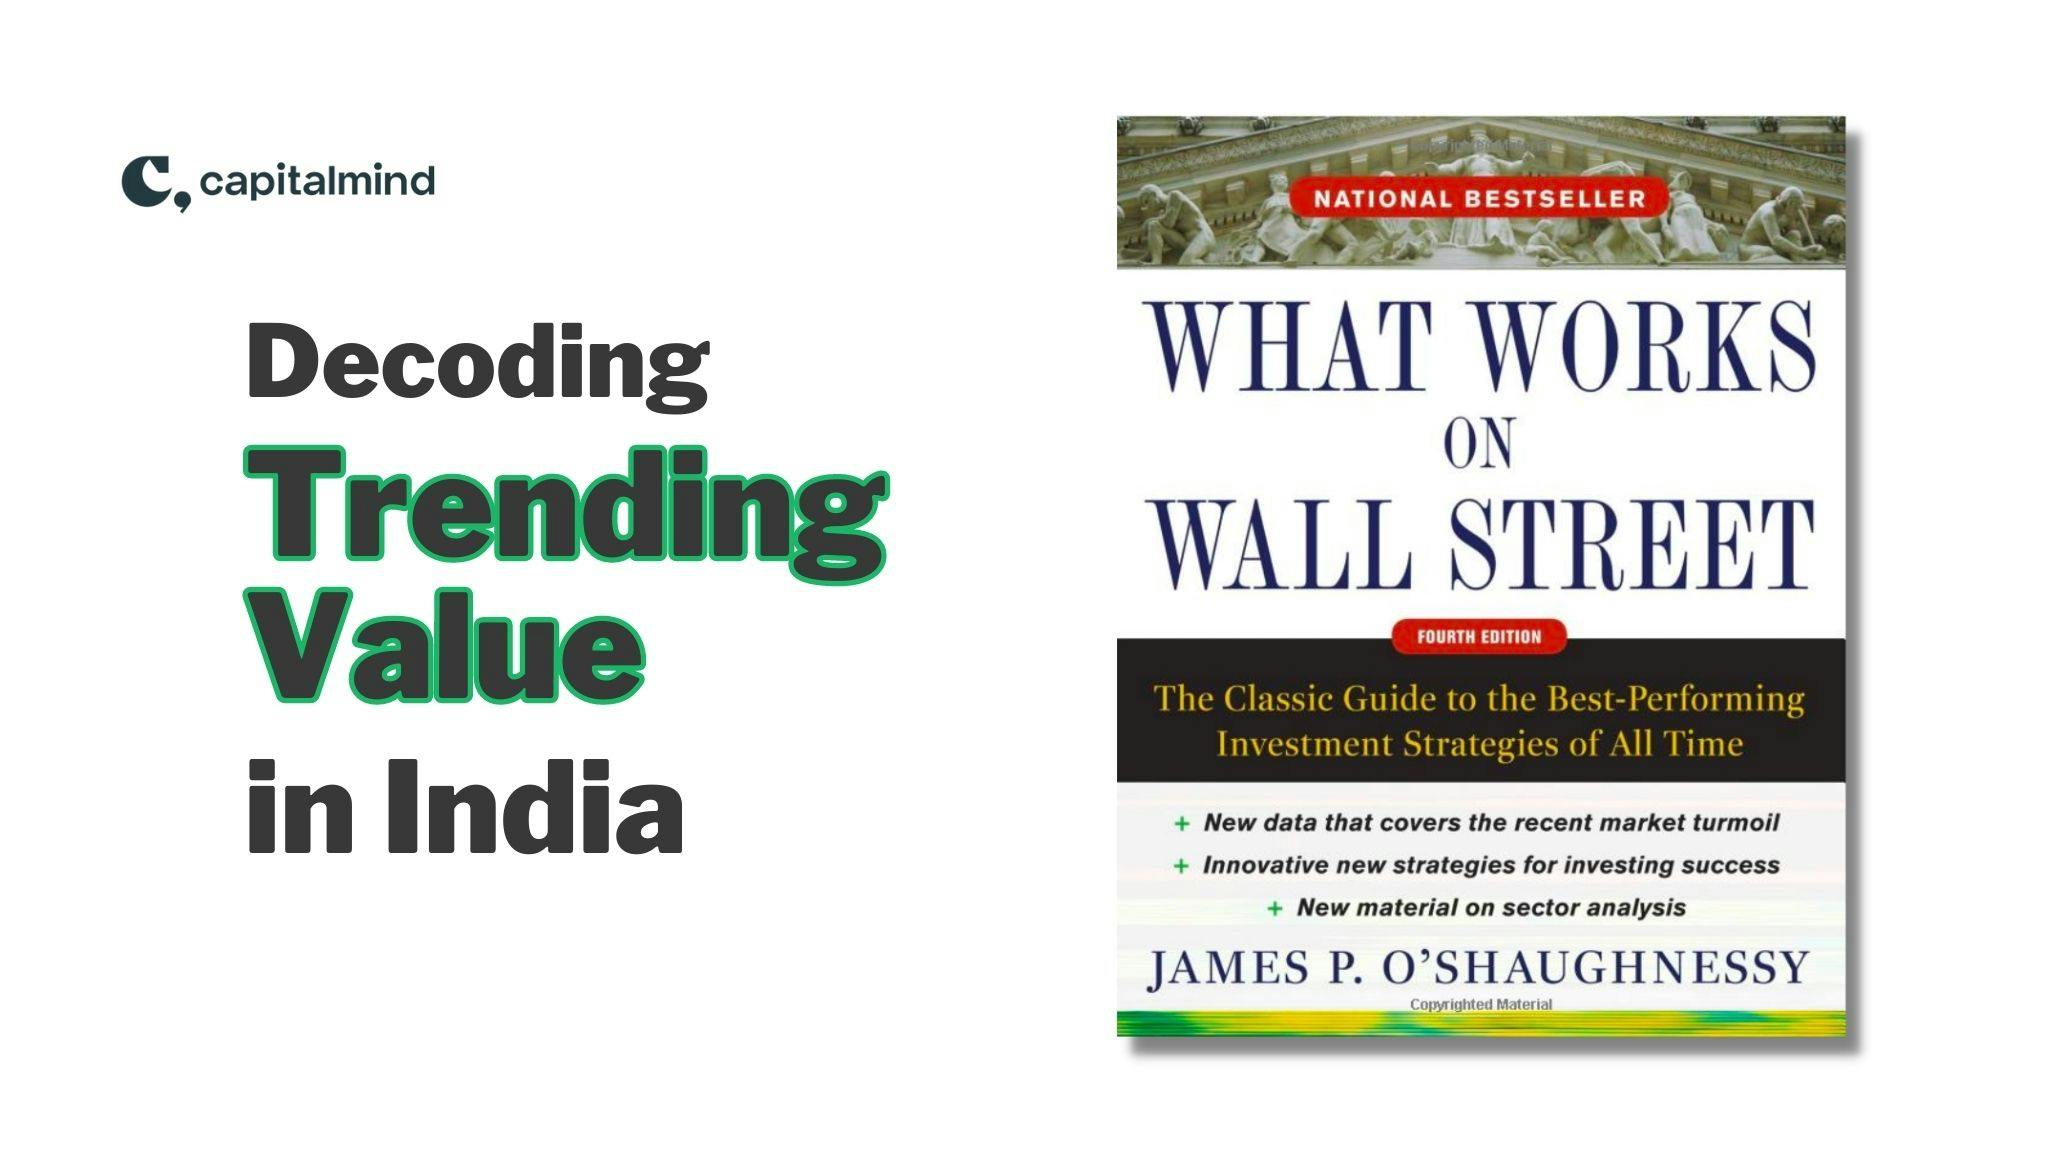 Decoding 'Trending Value' in India: Insights from the investing classic 'What works on Wall Street'